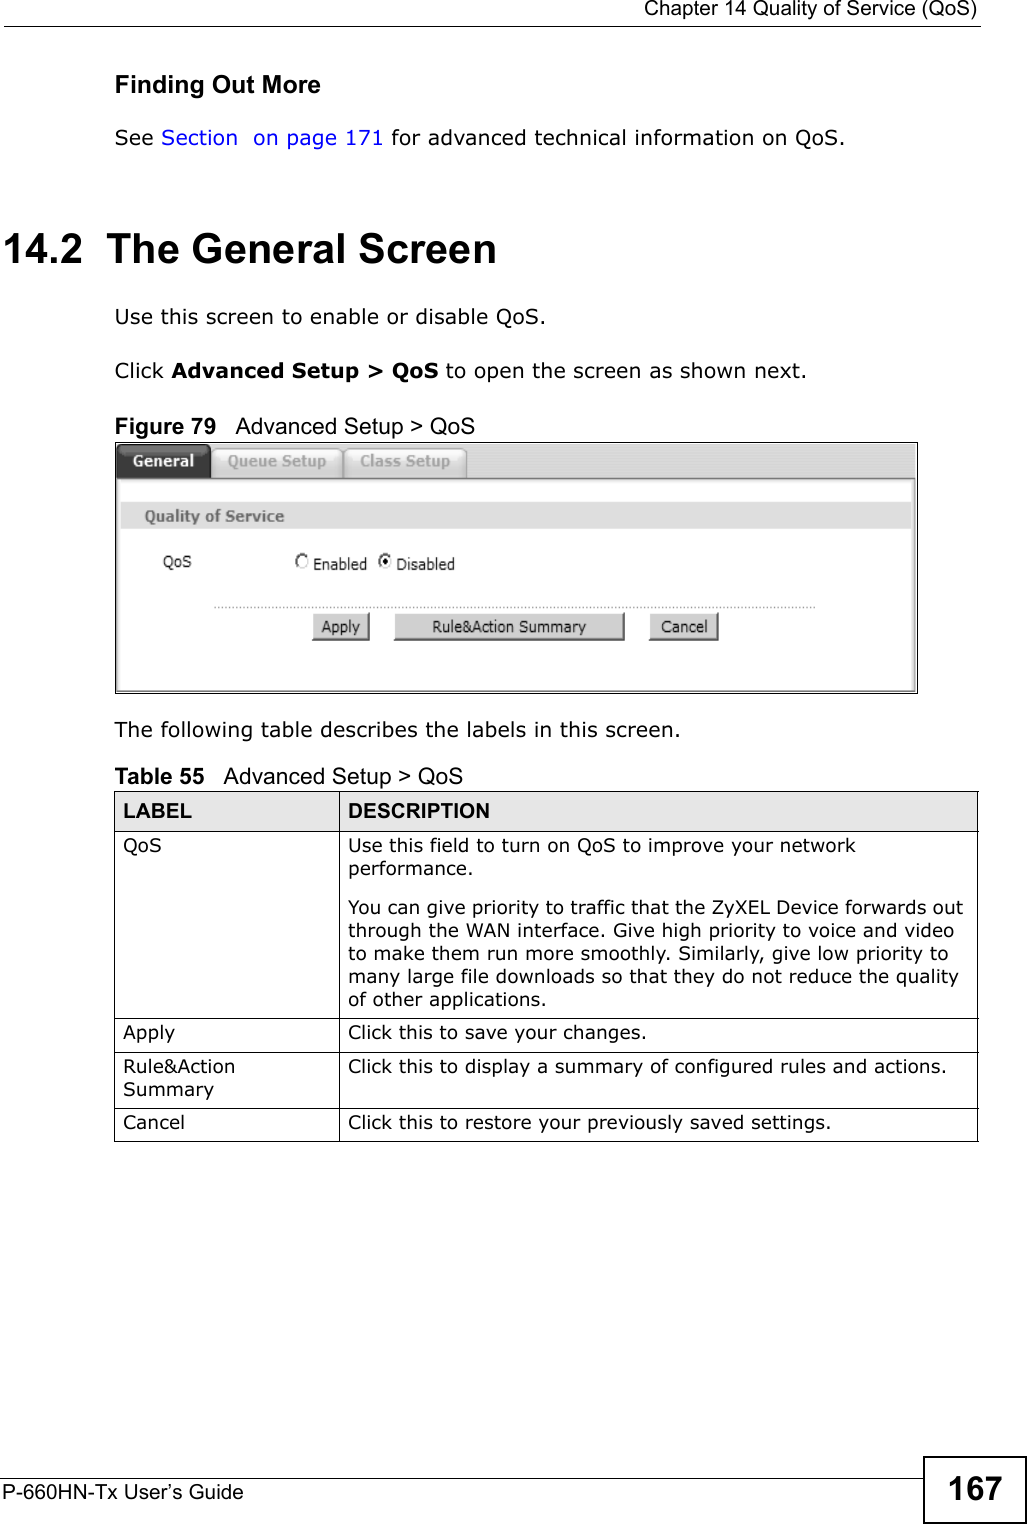  Chapter 14 Quality of Service (QoS)P-660HN-Tx User’s Guide 167Finding Out MoreSee Section  on page 171 for advanced technical information on QoS.14.2  The General ScreenUse this screen to enable or disable QoS.  Click Advanced Setup &gt; QoS to open the screen as shown next.Figure 79   Advanced Setup &gt; QoS The following table describes the labels in this screen. Table 55   Advanced Setup &gt; QoSLABEL DESCRIPTIONQoS Use this field to turn on QoS to improve your network performance. You can give priority to traffic that the ZyXEL Device forwards out through the WAN interface. Give high priority to voice and video to make them run more smoothly. Similarly, give low priority to many large file downloads so that they do not reduce the quality of other applications. Apply Click this to save your changes.Rule&amp;Action SummaryClick this to display a summary of configured rules and actions.Cancel Click this to restore your previously saved settings.